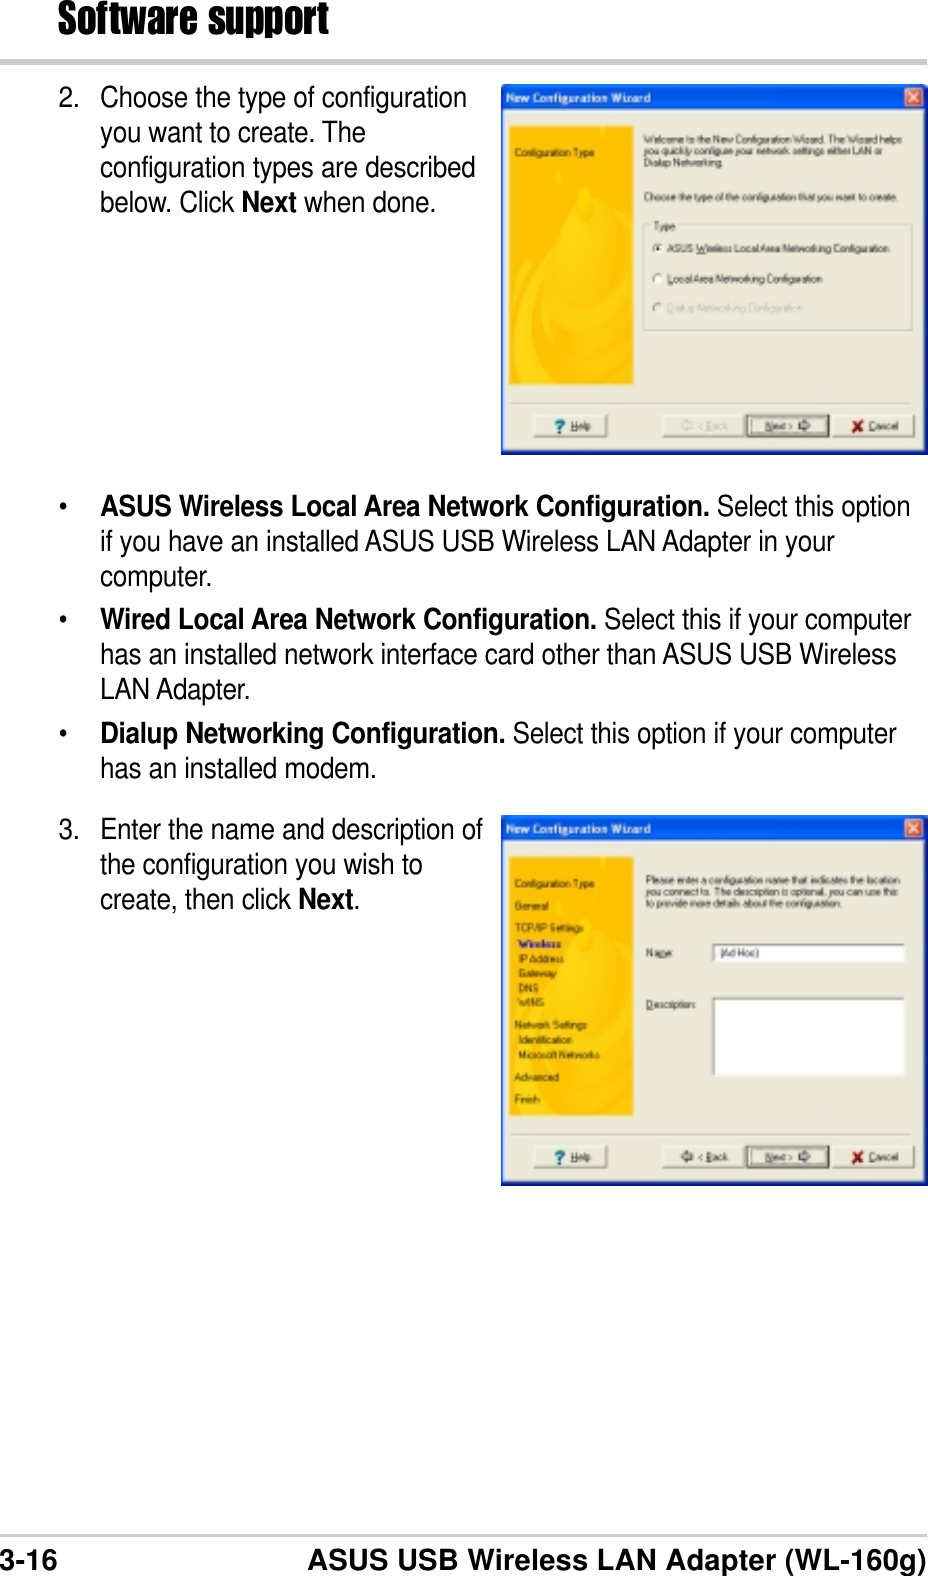 3-16 ASUS USB Wireless LAN Adapter (WL-160g)Software support2. Choose the type of configurationyou want to create. Theconfiguration types are describedbelow. Click Next when done.•ASUS Wireless Local Area Network Configuration. Select this optionif you have an installed ASUS USB Wireless LAN Adapter in yourcomputer.•Wired Local Area Network Configuration. Select this if your computerhas an installed network interface card other than ASUS USB WirelessLAN Adapter.•Dialup Networking Configuration. Select this option if your computerhas an installed modem.3. Enter the name and description ofthe configuration you wish tocreate, then click Next.